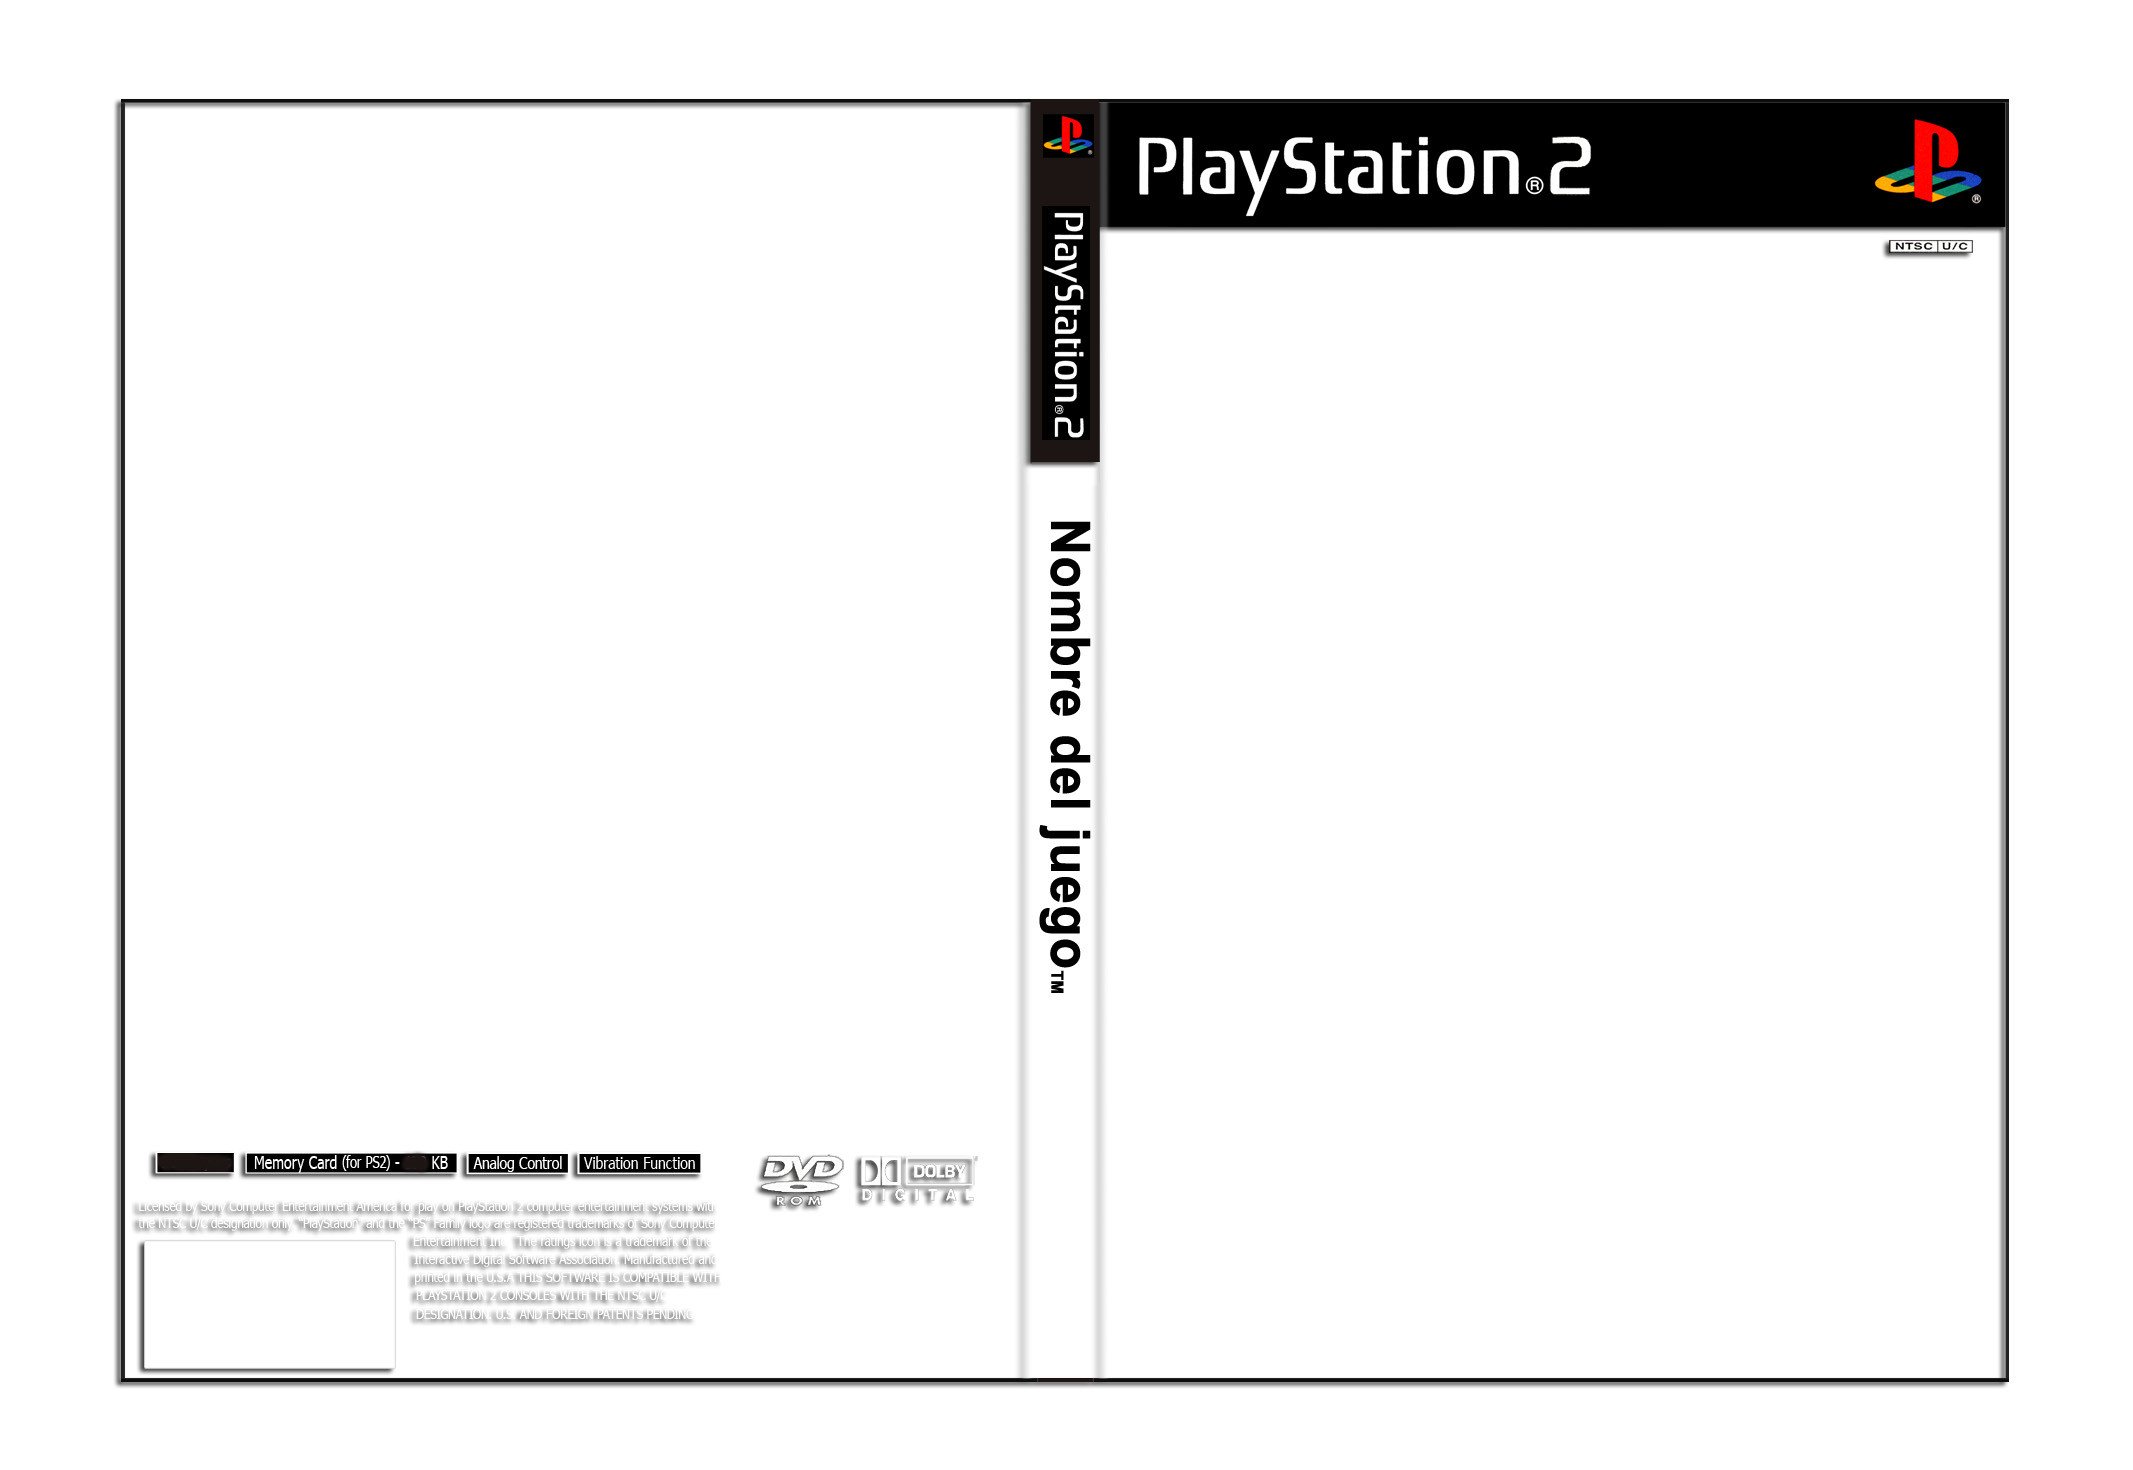 Template Playstation 2 Cover by Juanky on DeviantArt